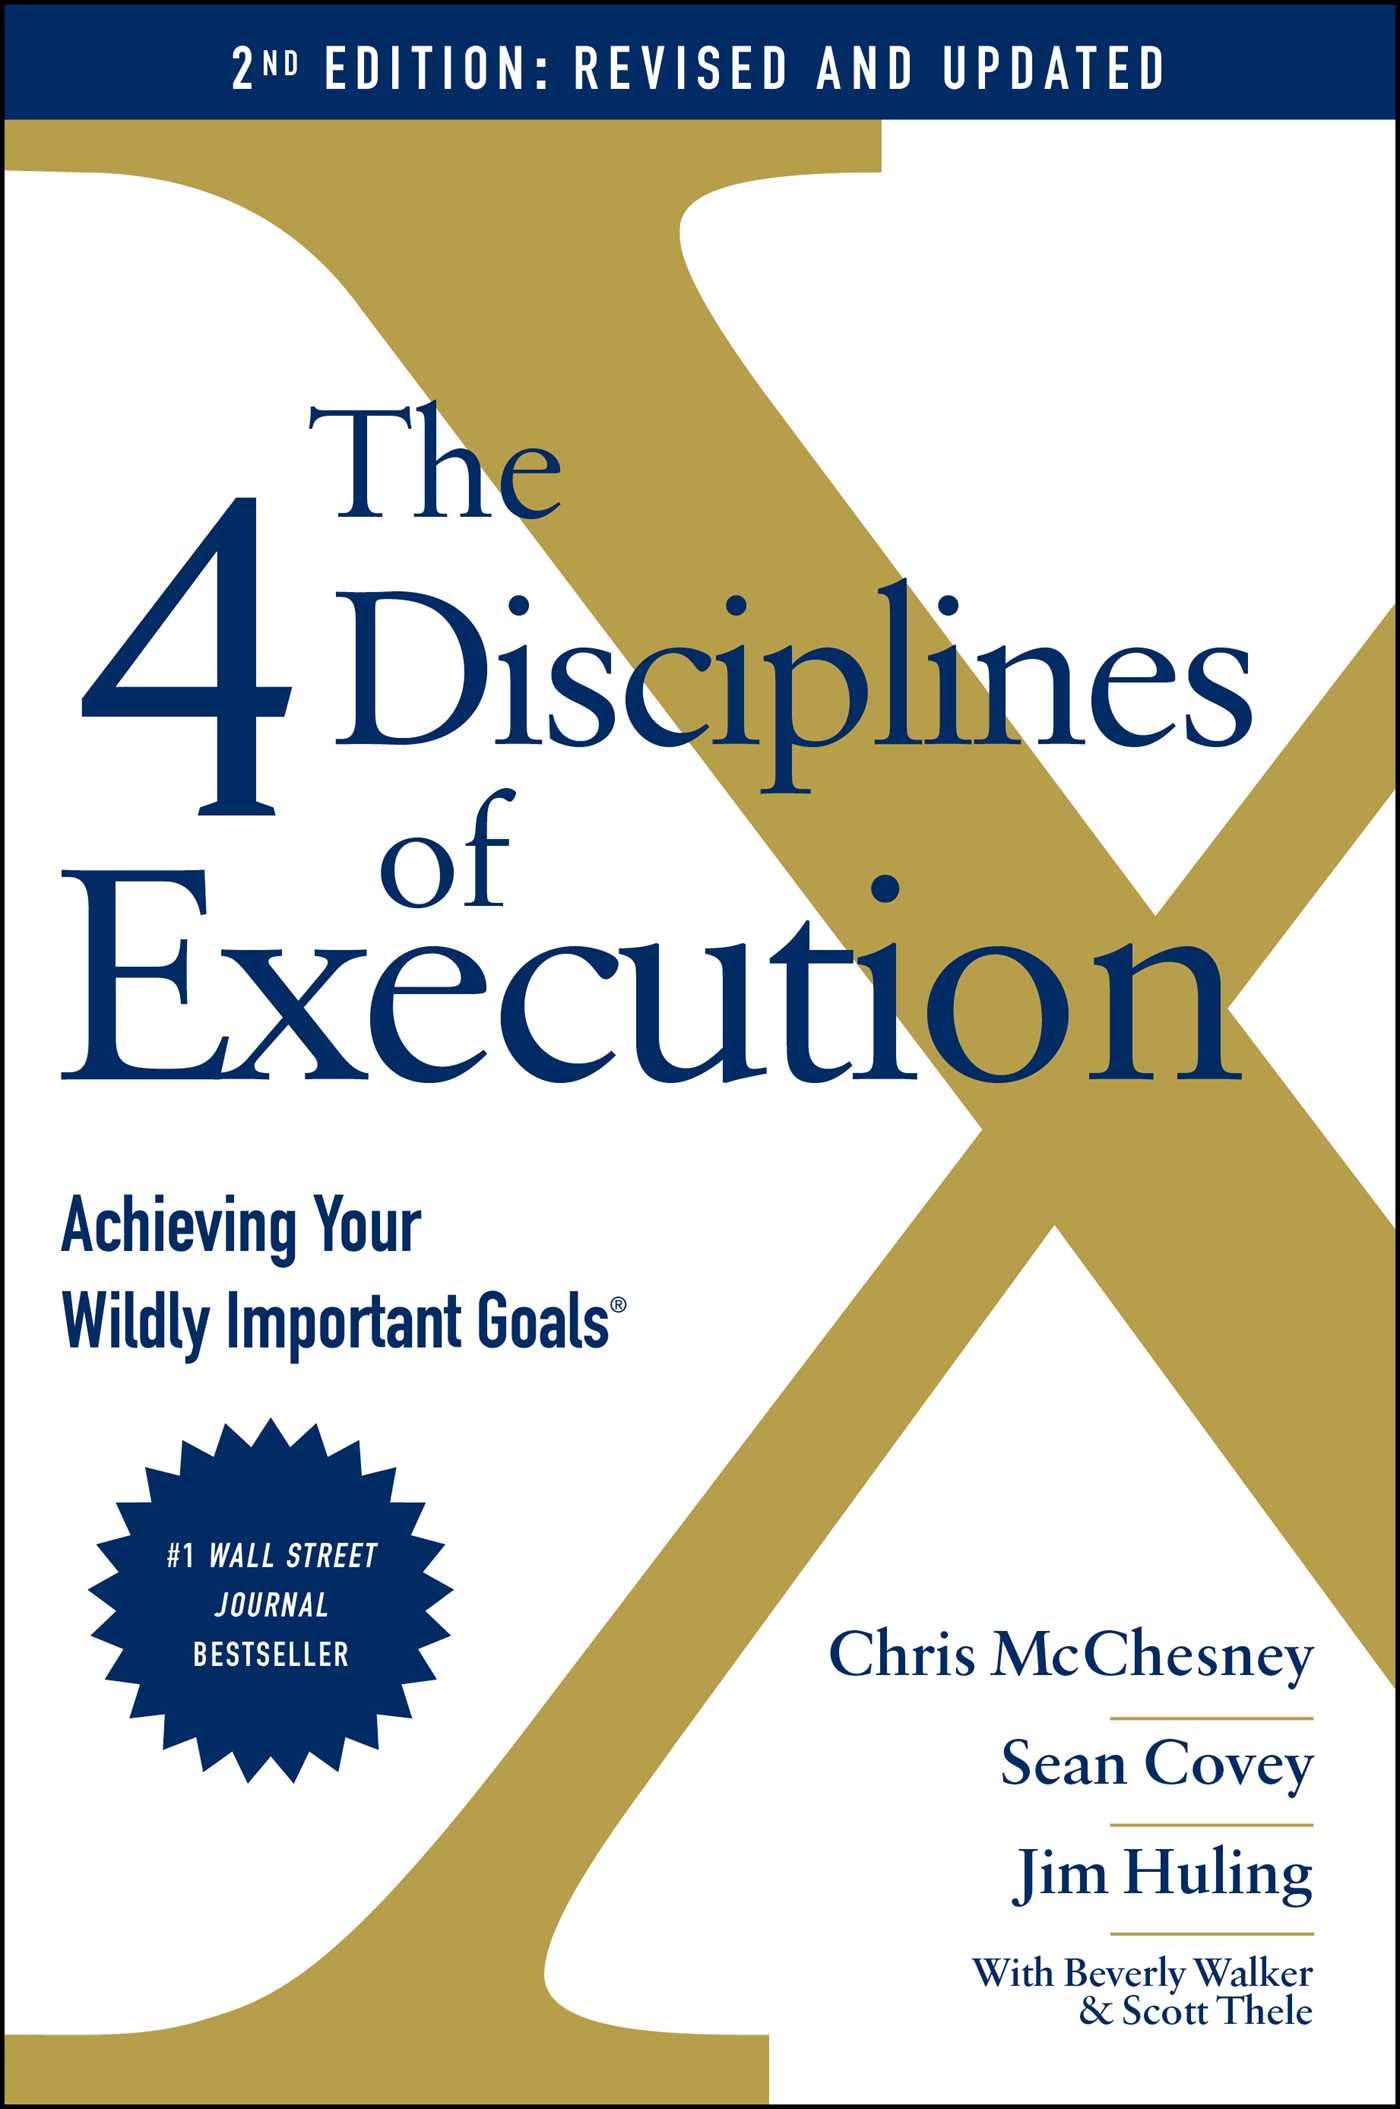 The 4 Disciplines of Execution | Sean Covey, Chris McChesney